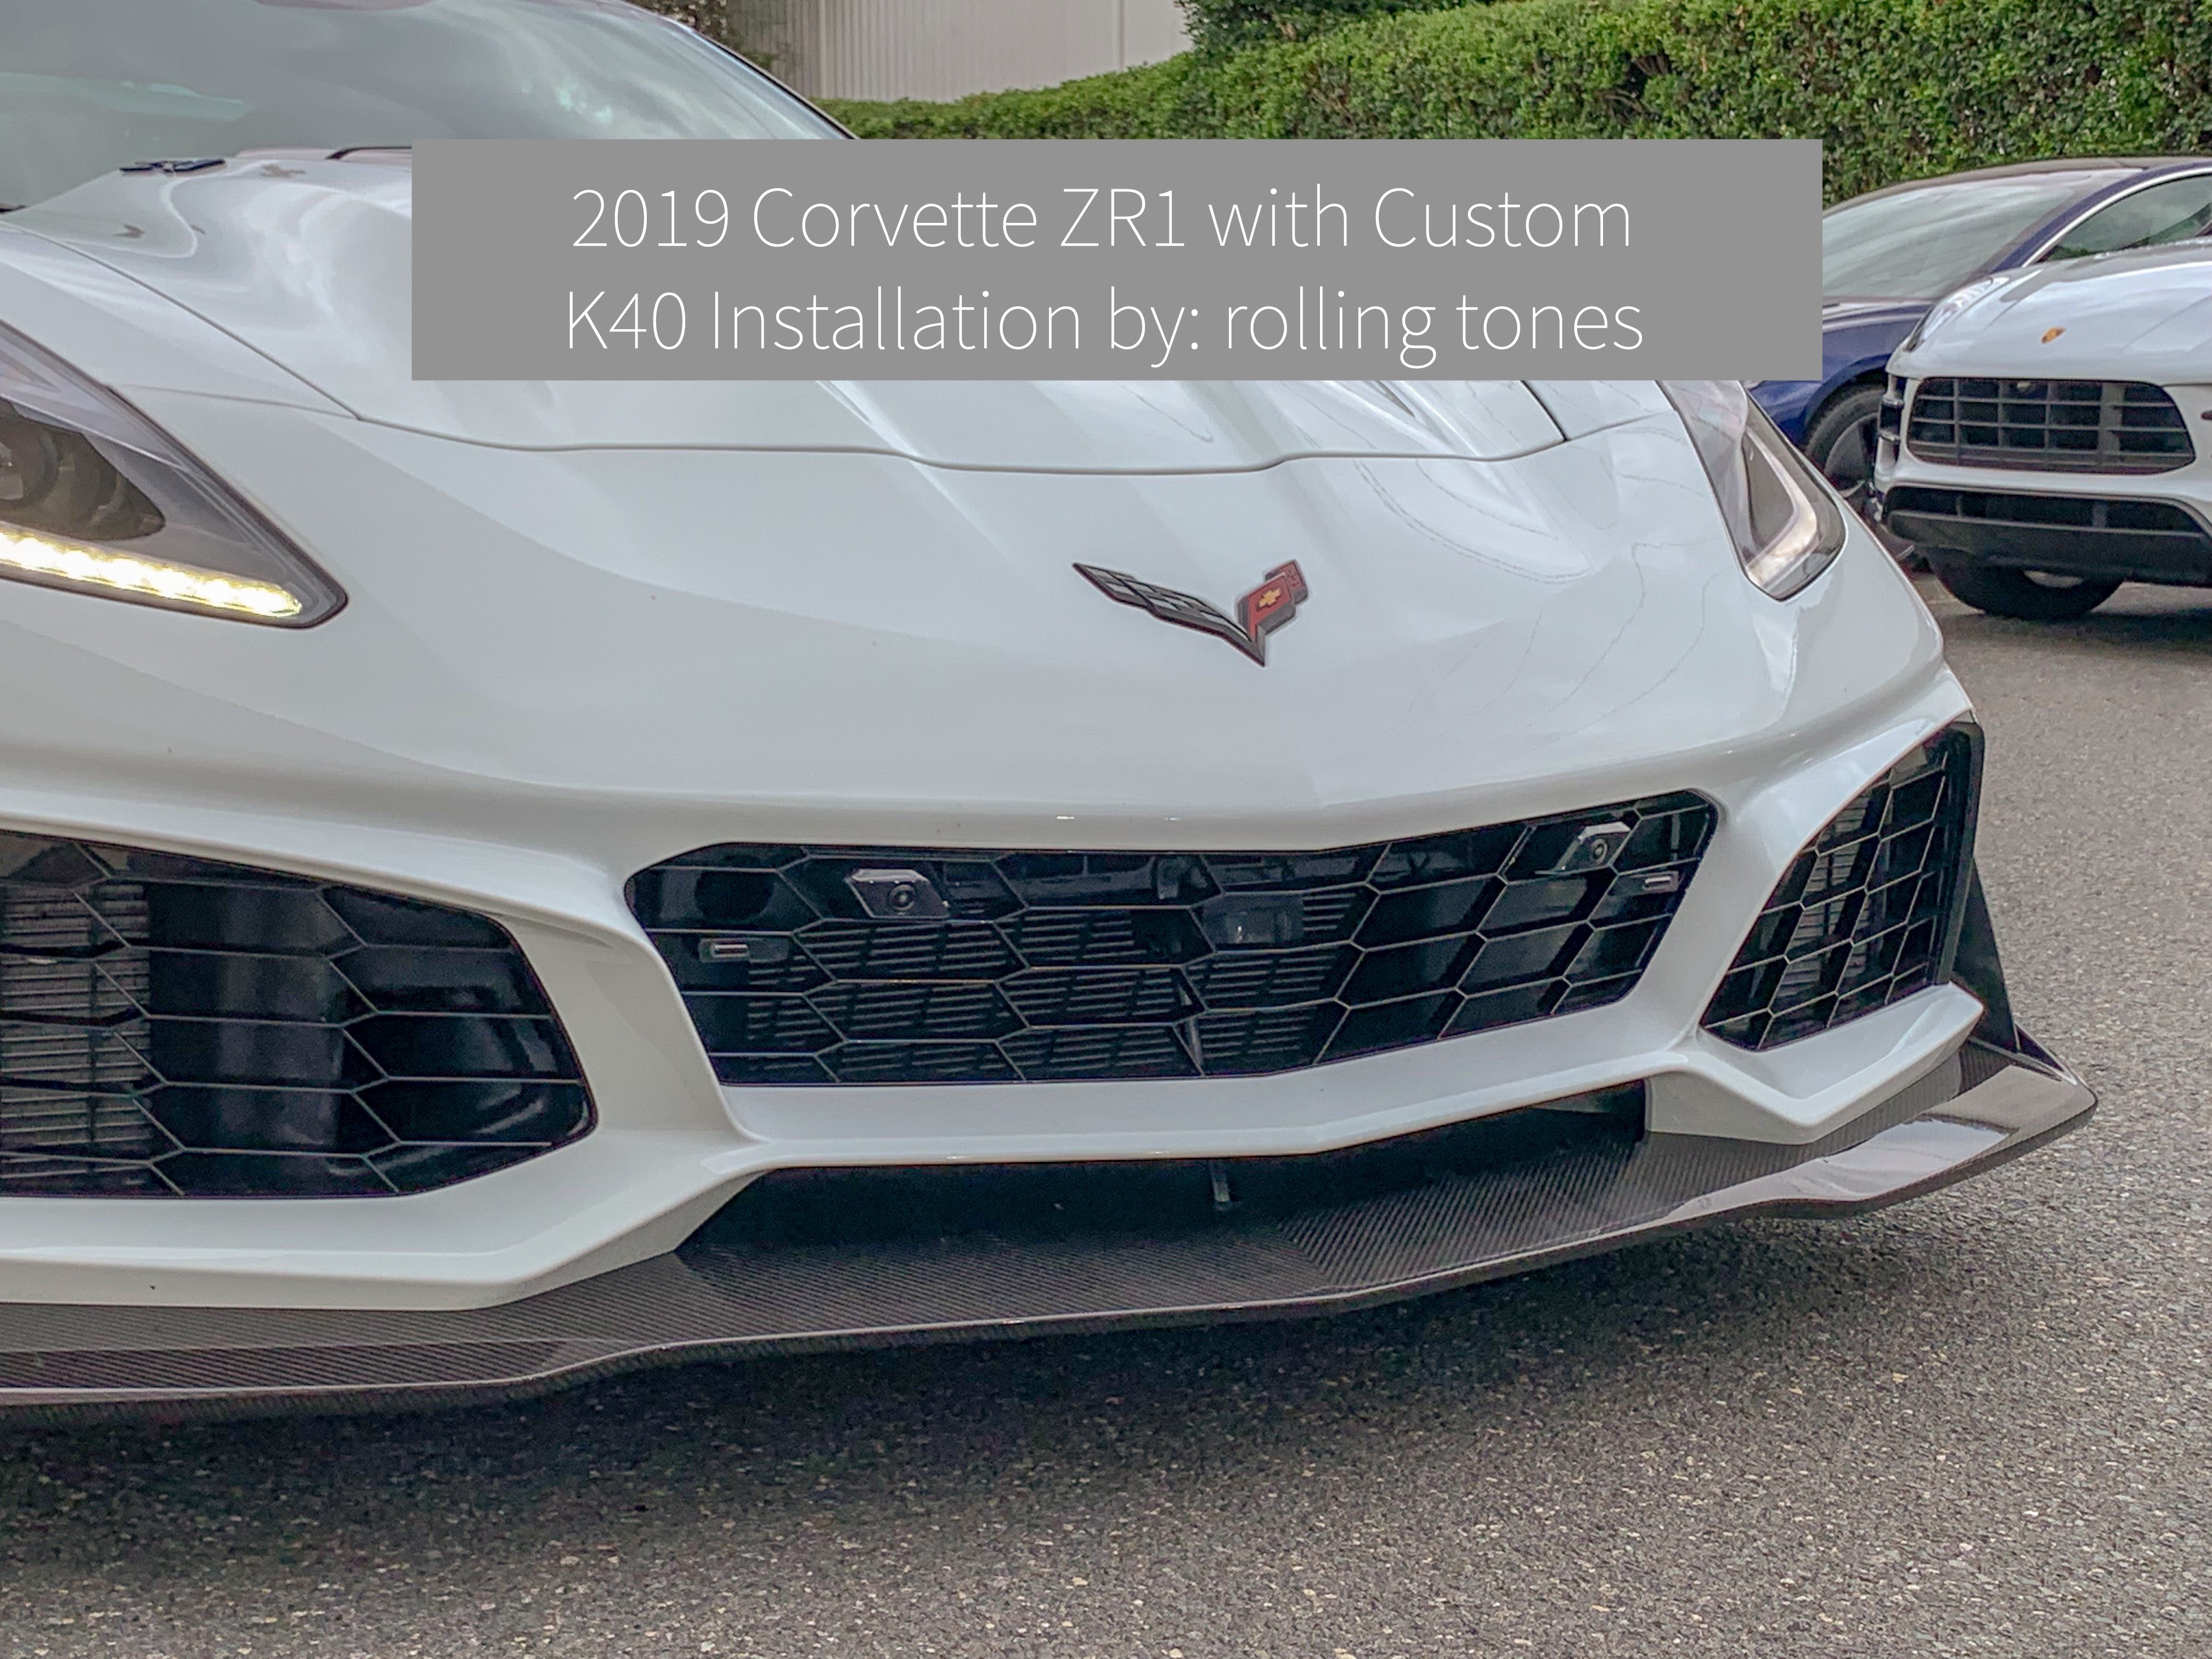 K40 radar detector component placement on front of 2019 Corvette in Charlotte, NC